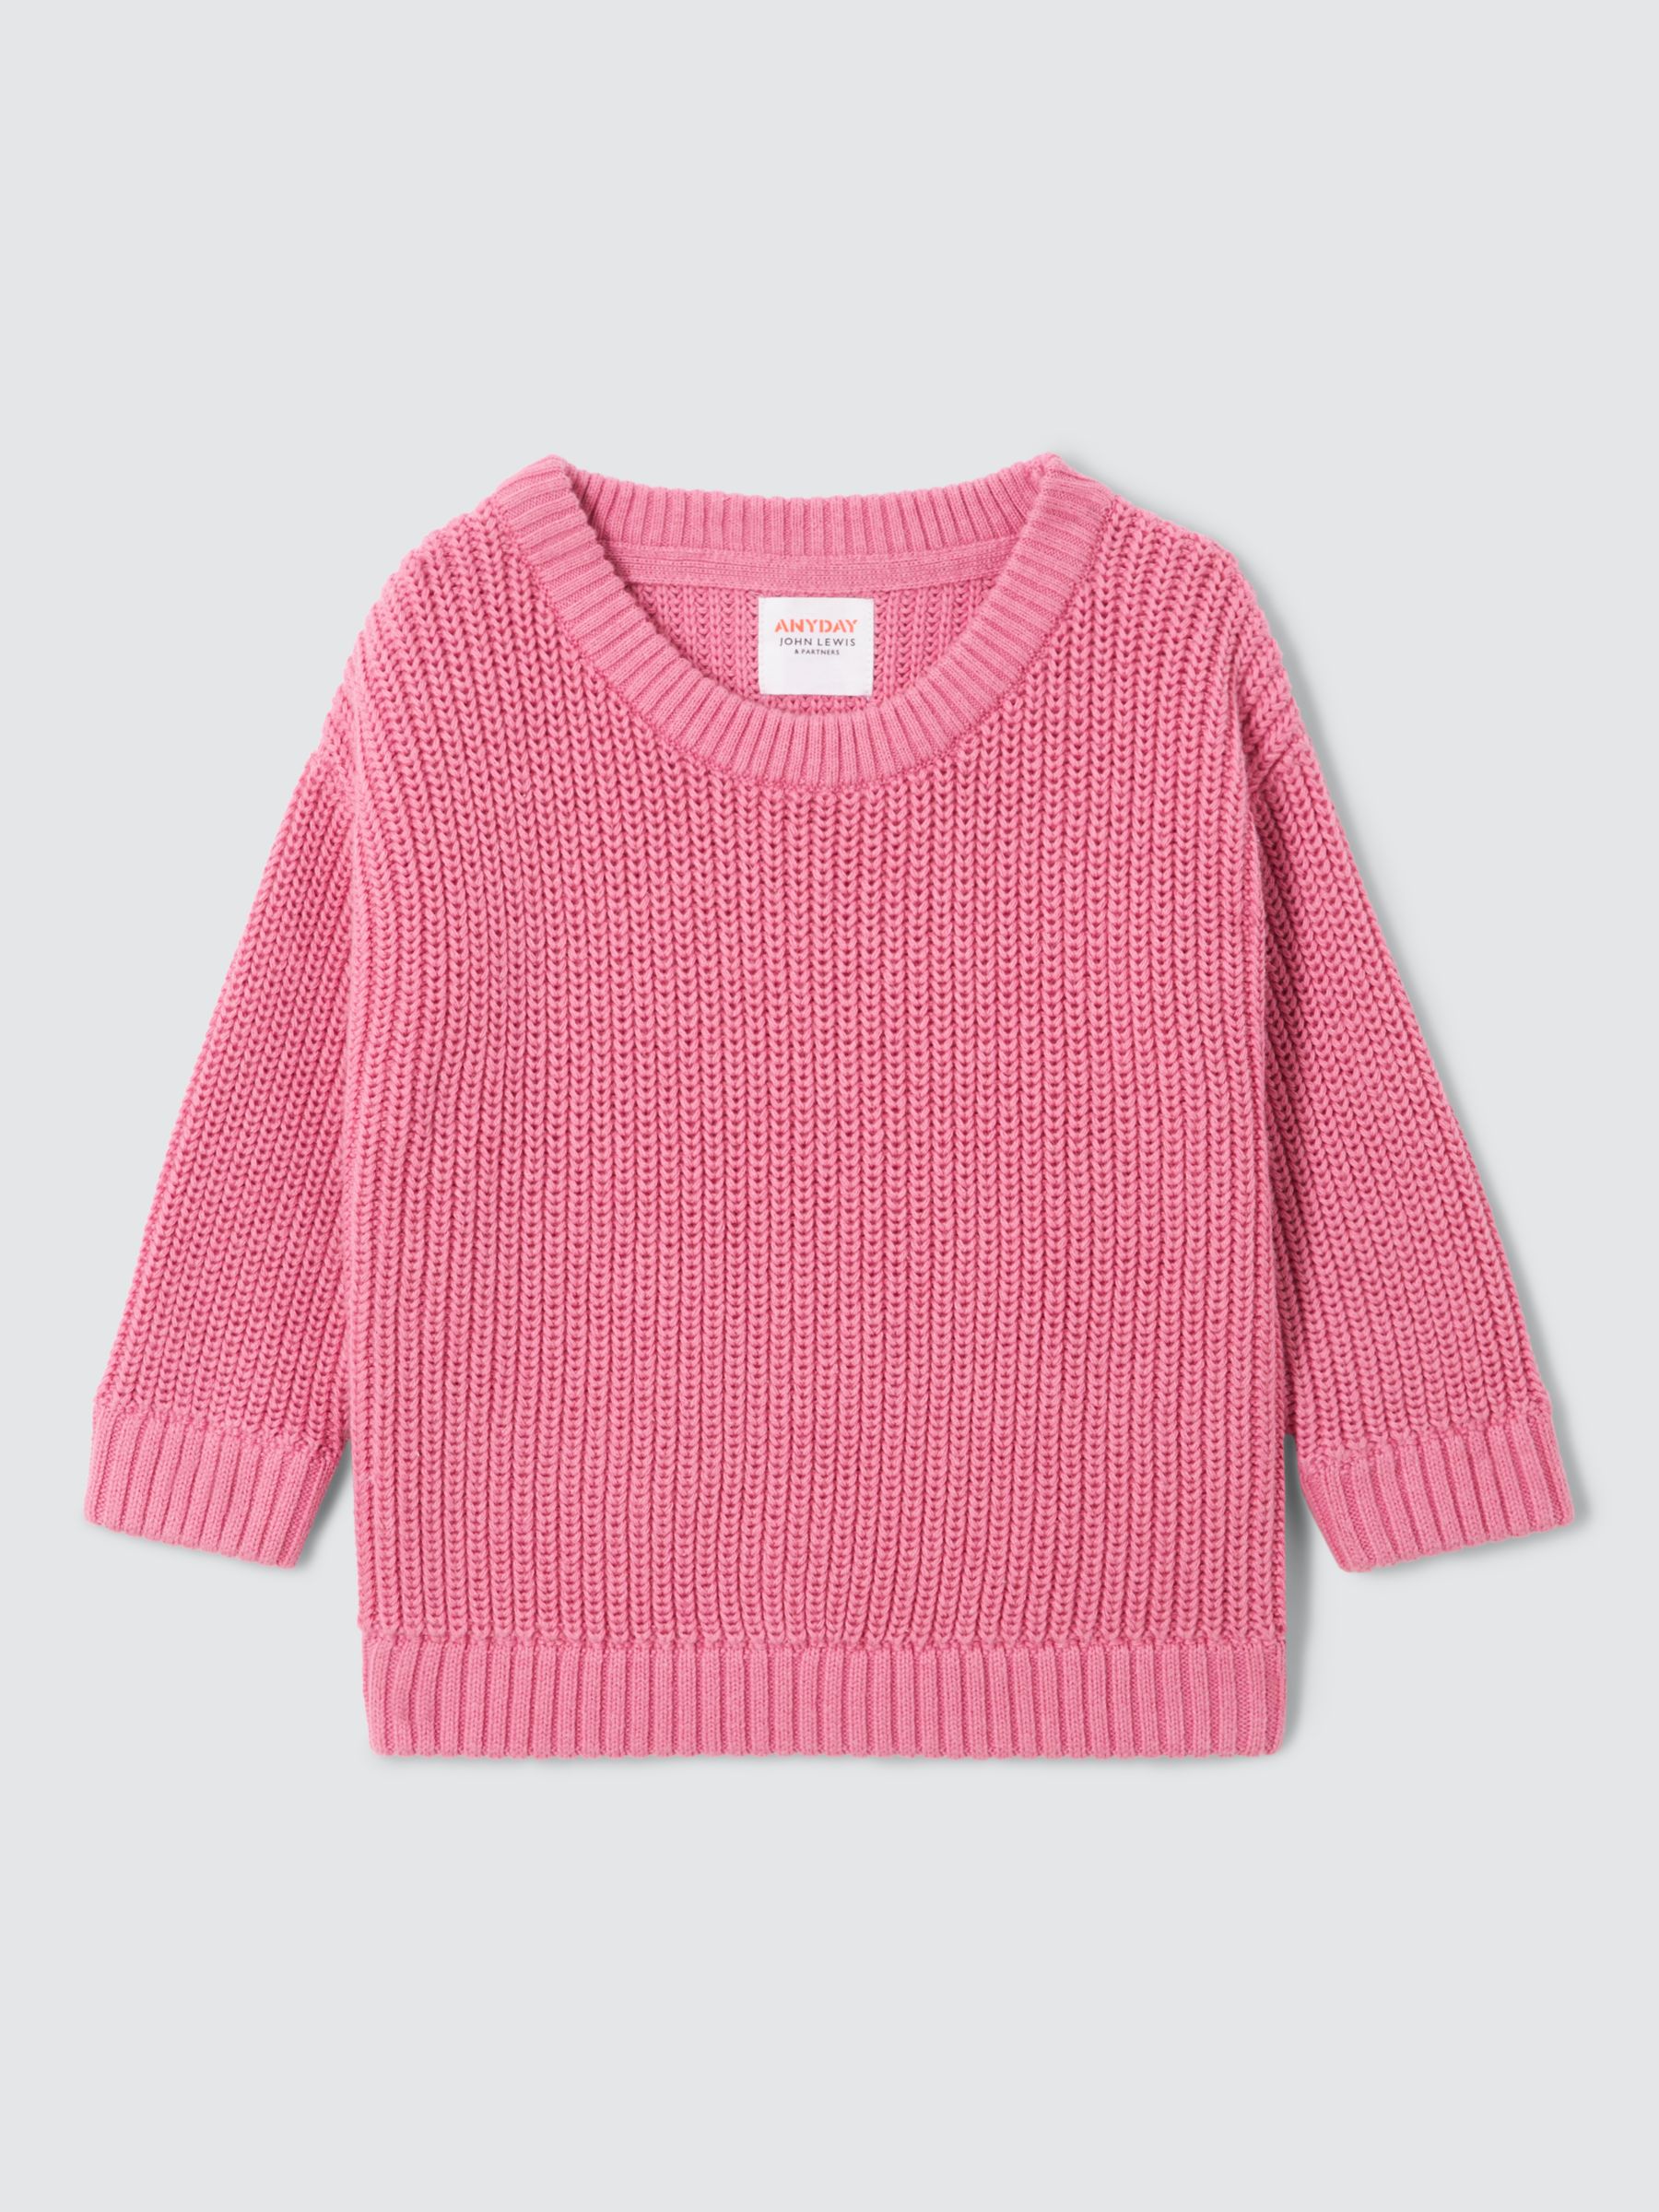 John Lewis ANYDAY Baby Knit Jumper, Pink, 9-12 months